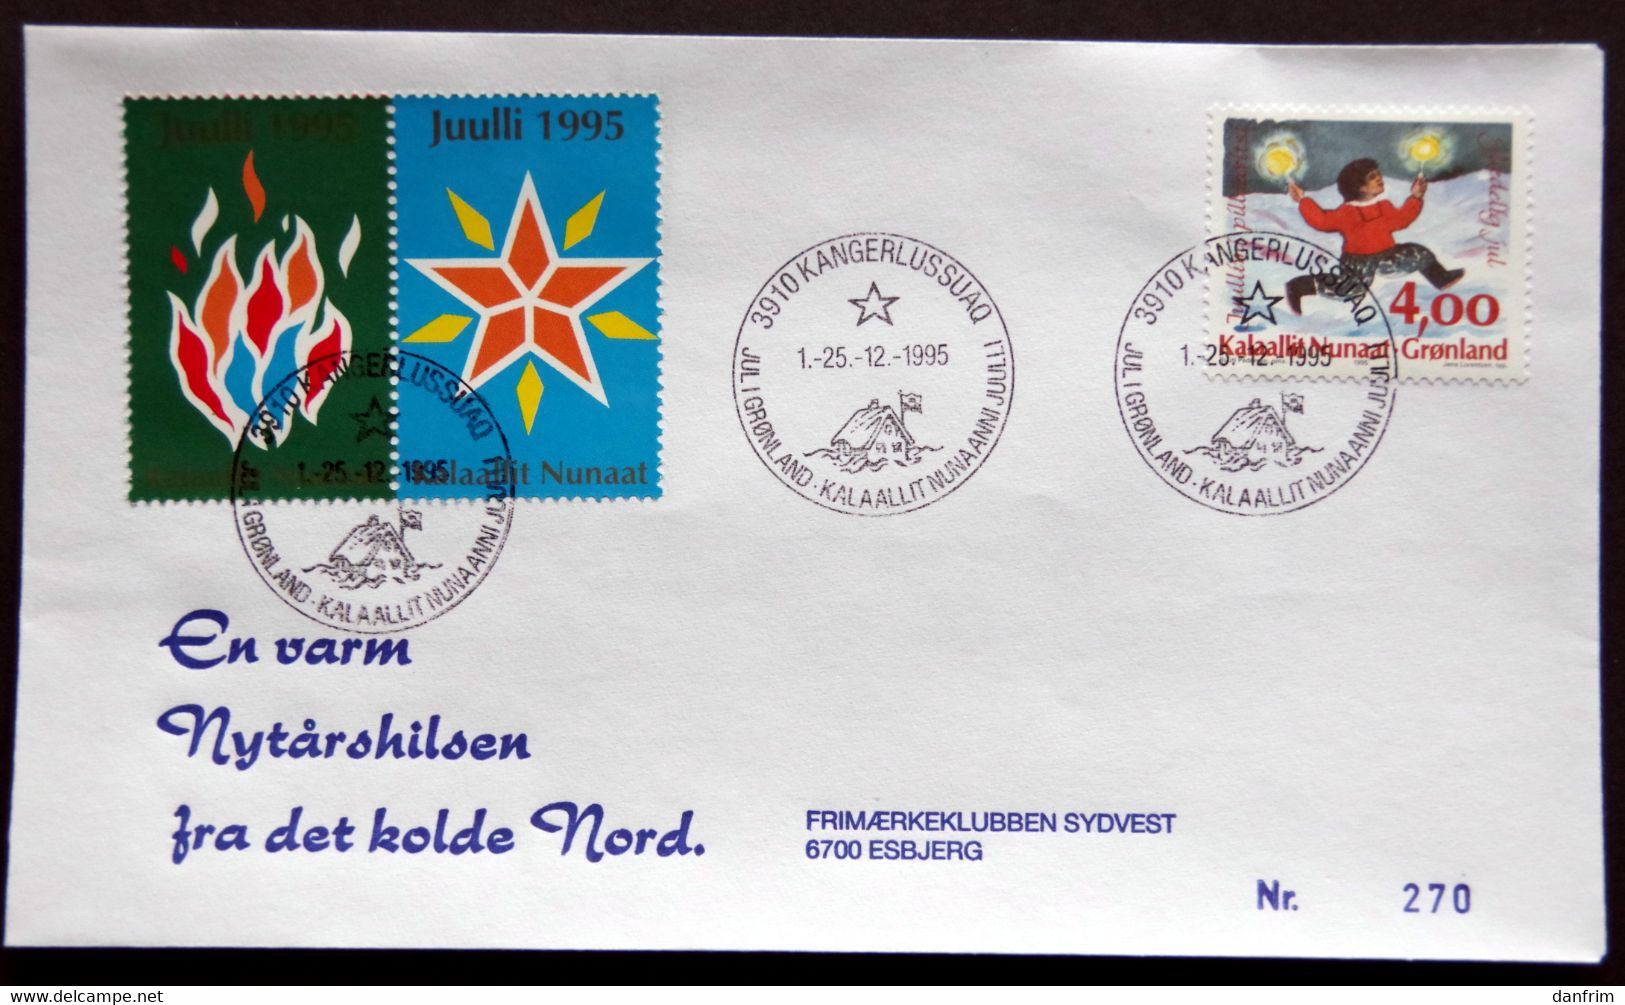 Greenland 1995 Cover  Minr.279  KANGERLUSSUA   (lot  1292 ) - Covers & Documents